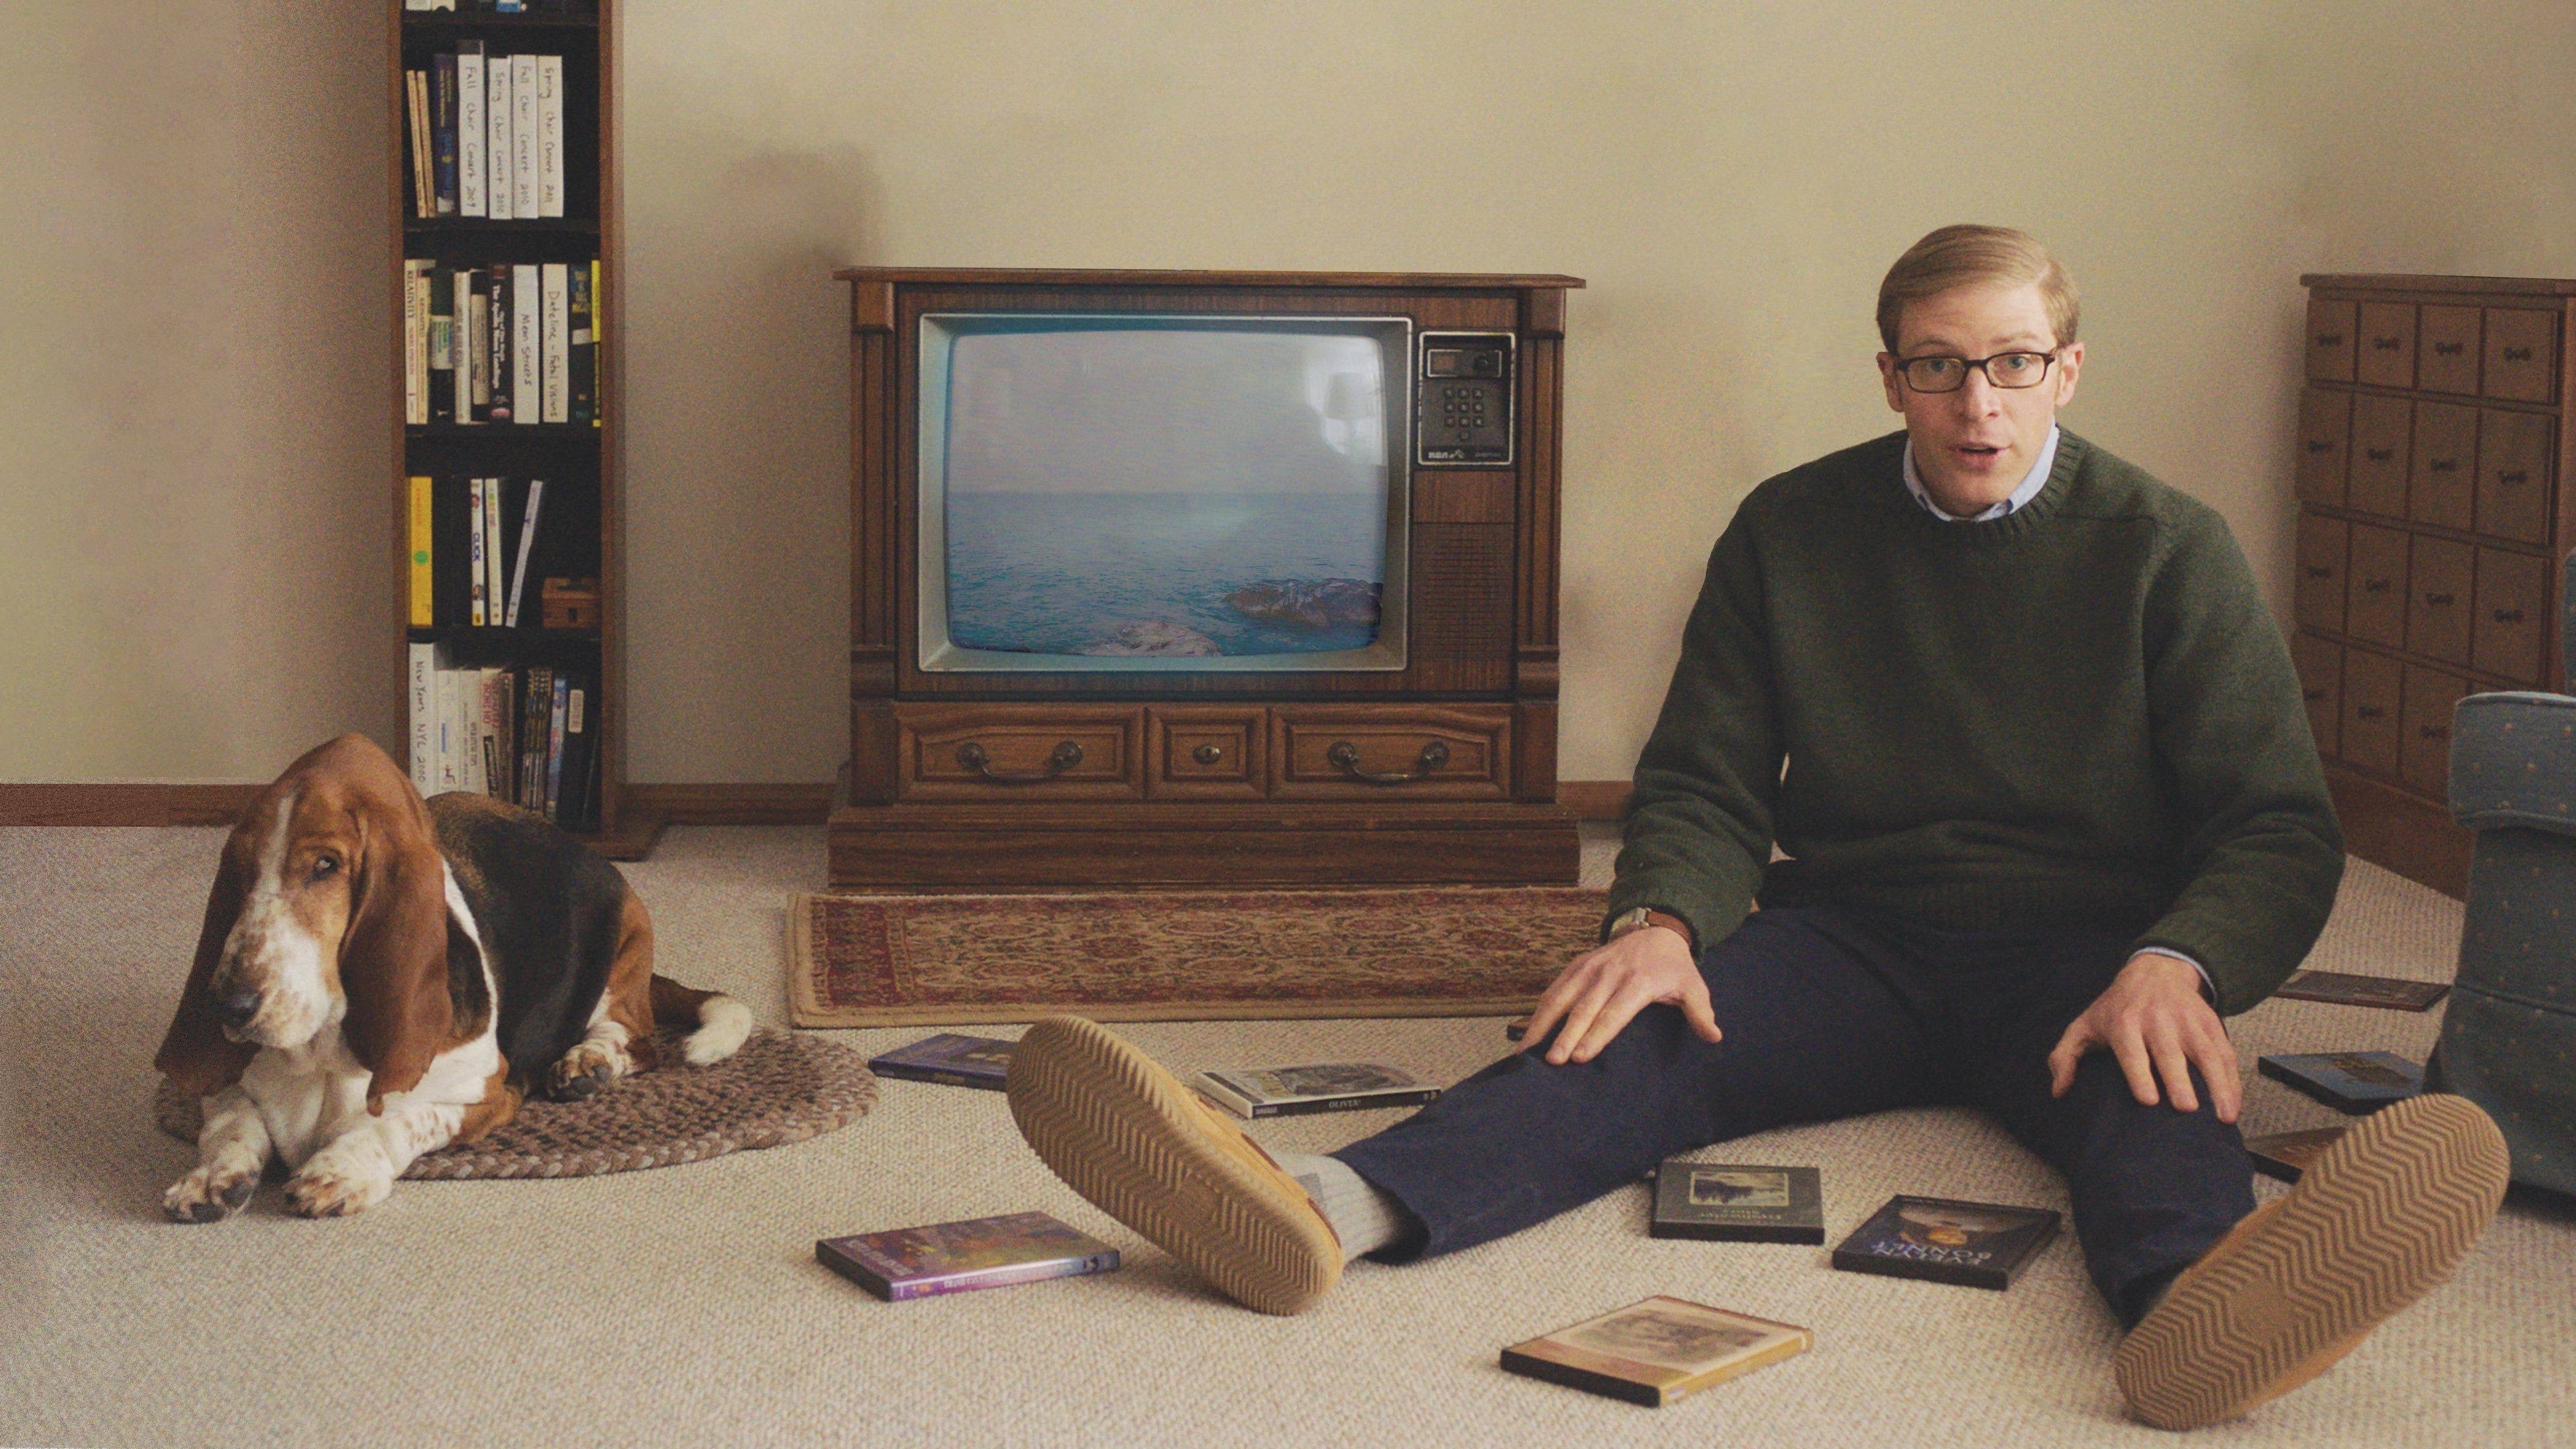 Joe Pera Builds a Chair with You